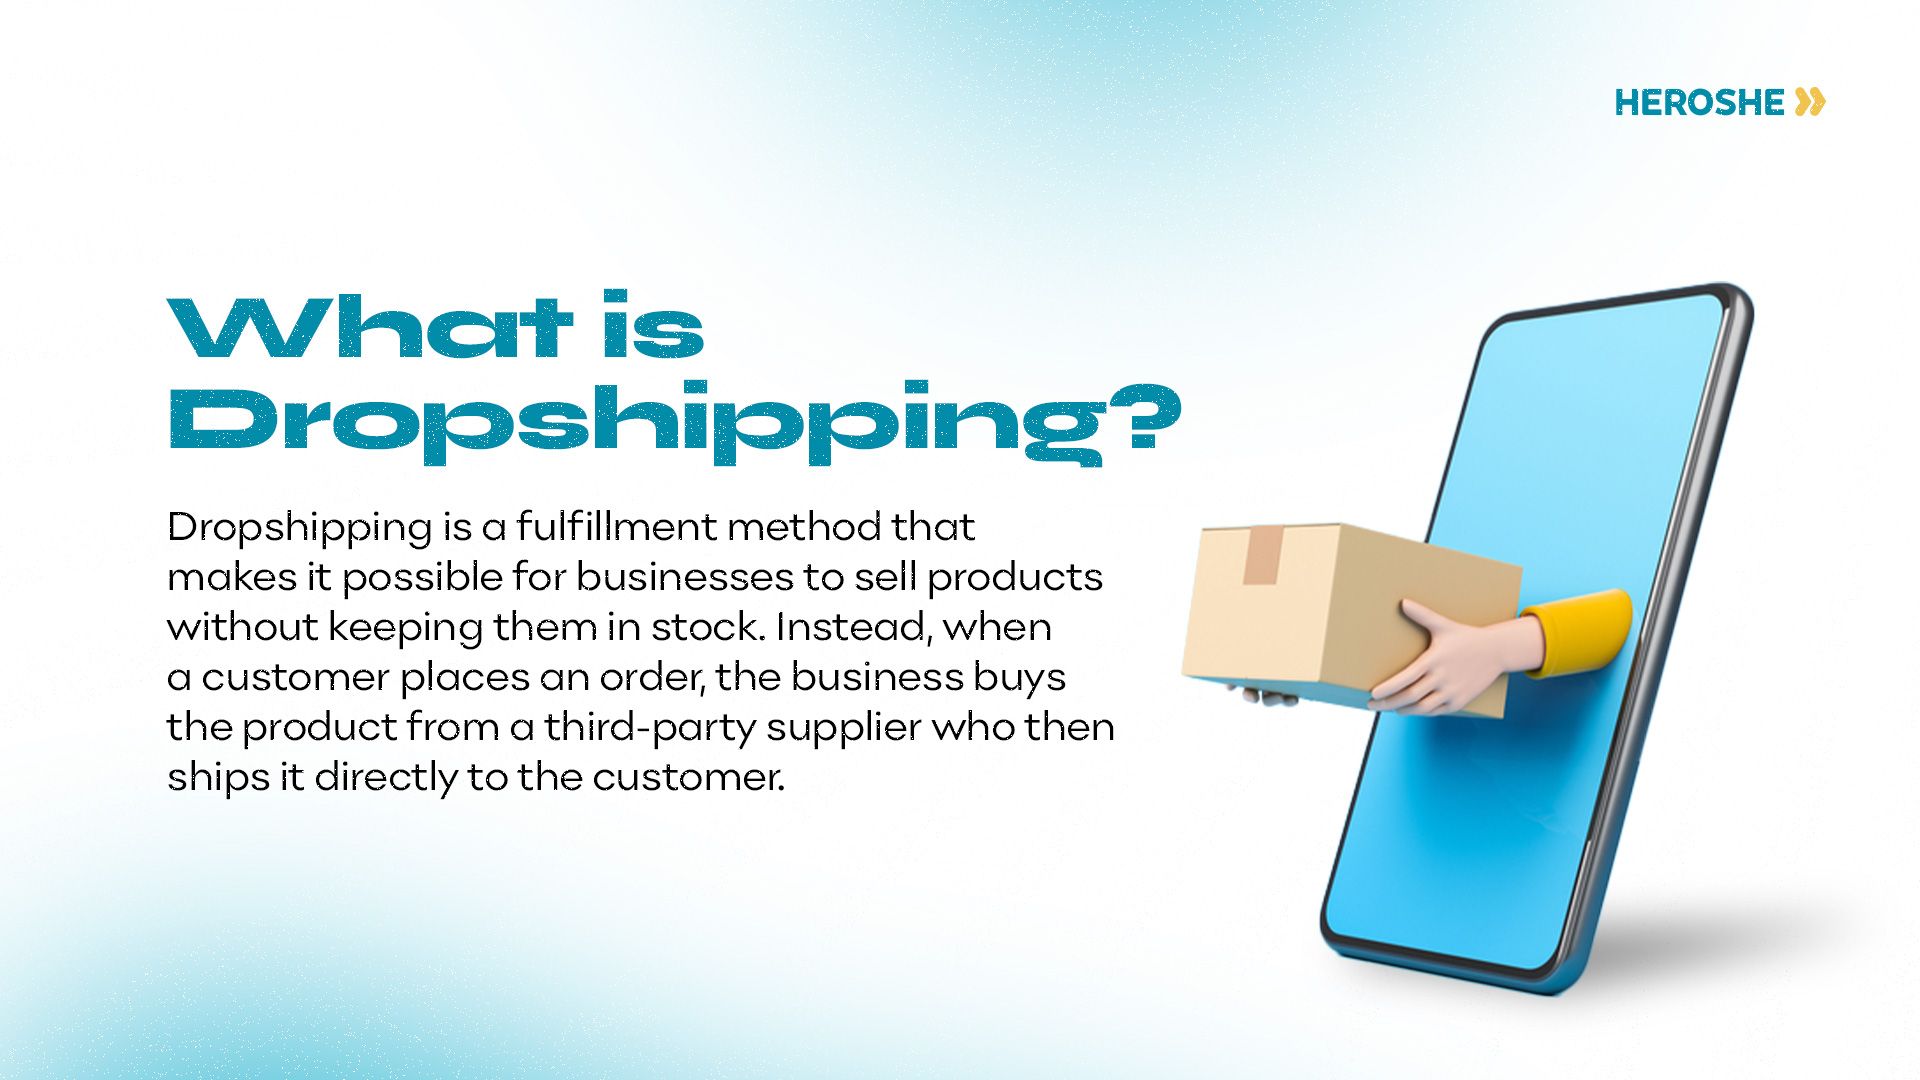 A poster showing the definition of dropshipping